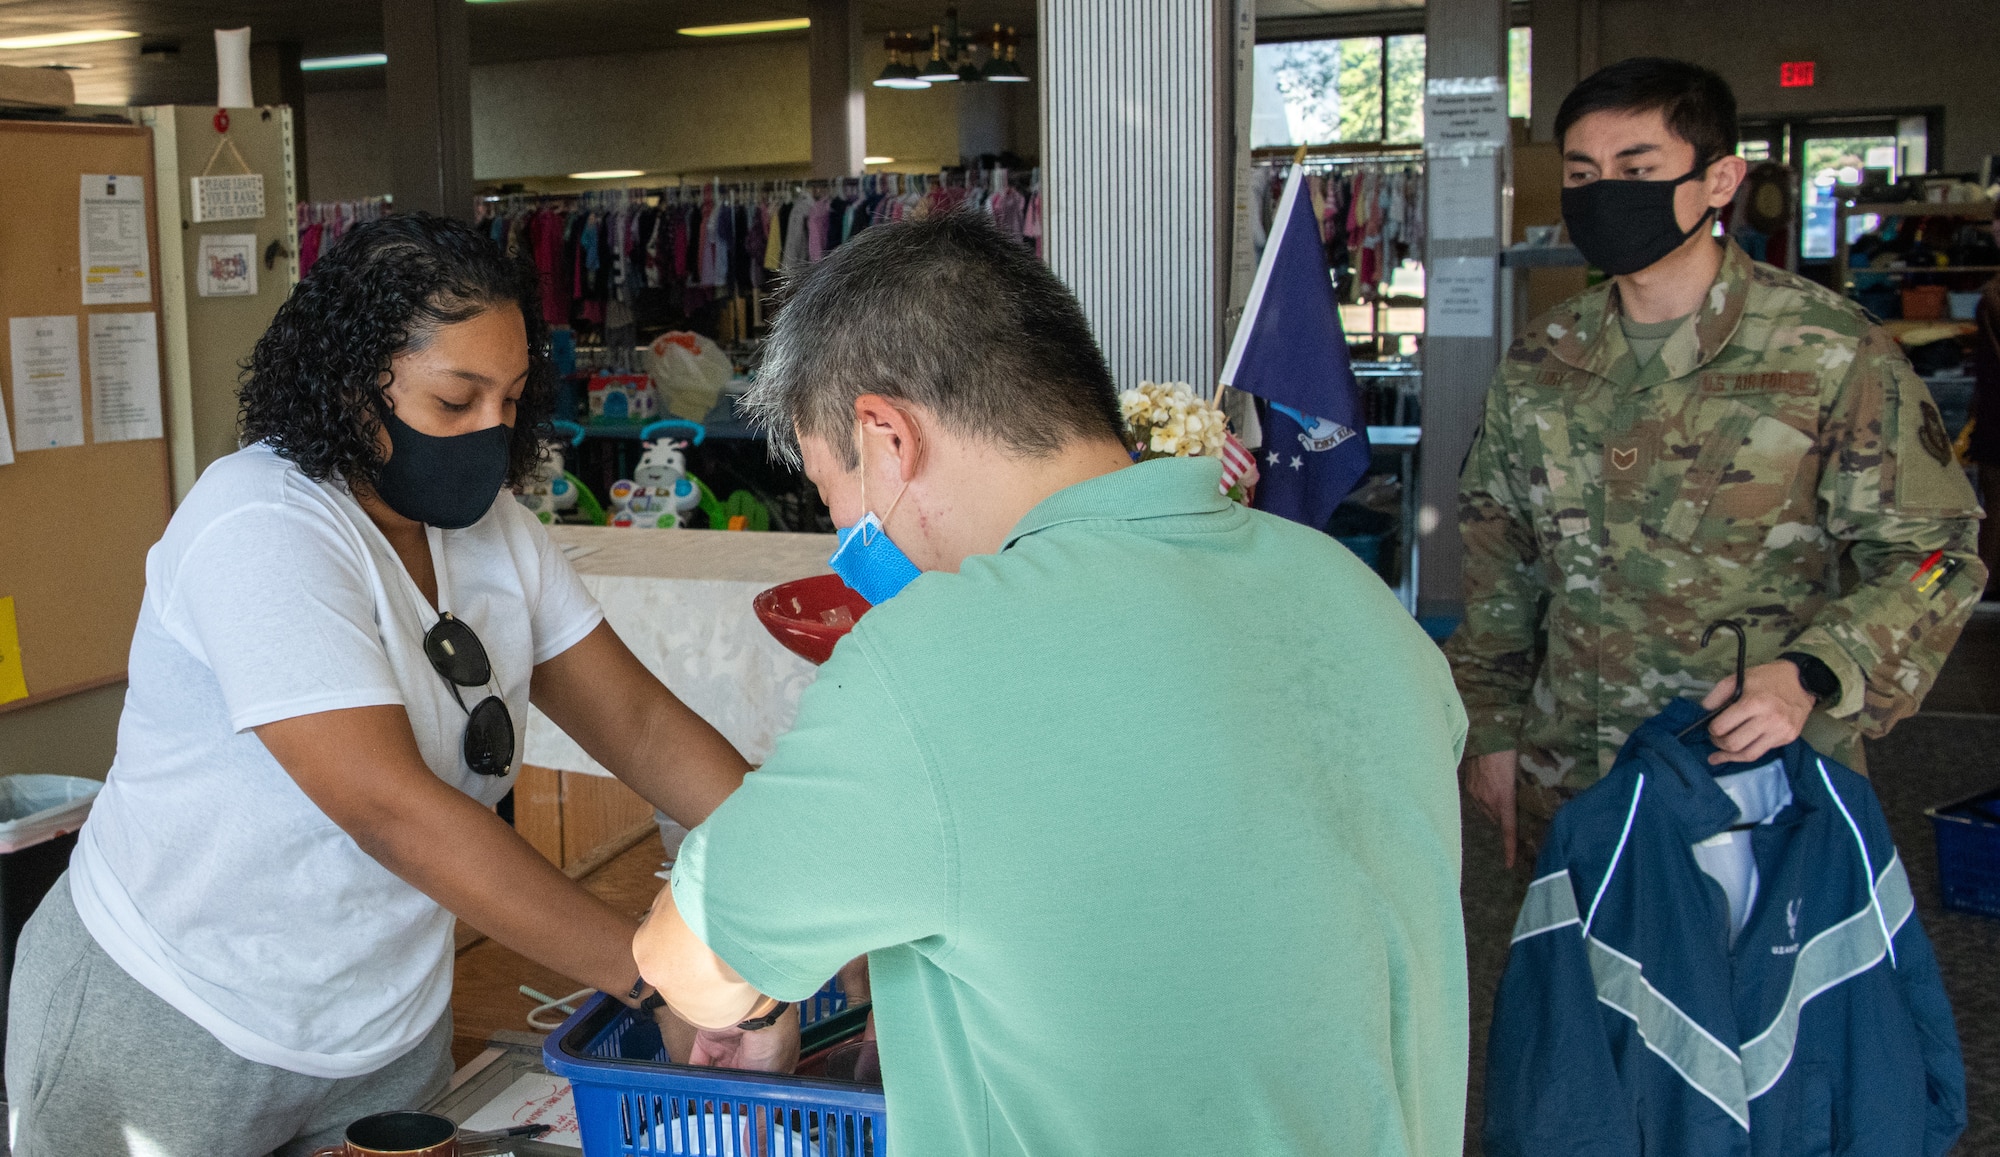 Airman Dynaeja Nimmons assists customers at the Airman’s Attic at Travis Air Force Base, California, on Oct. 17, 2020.